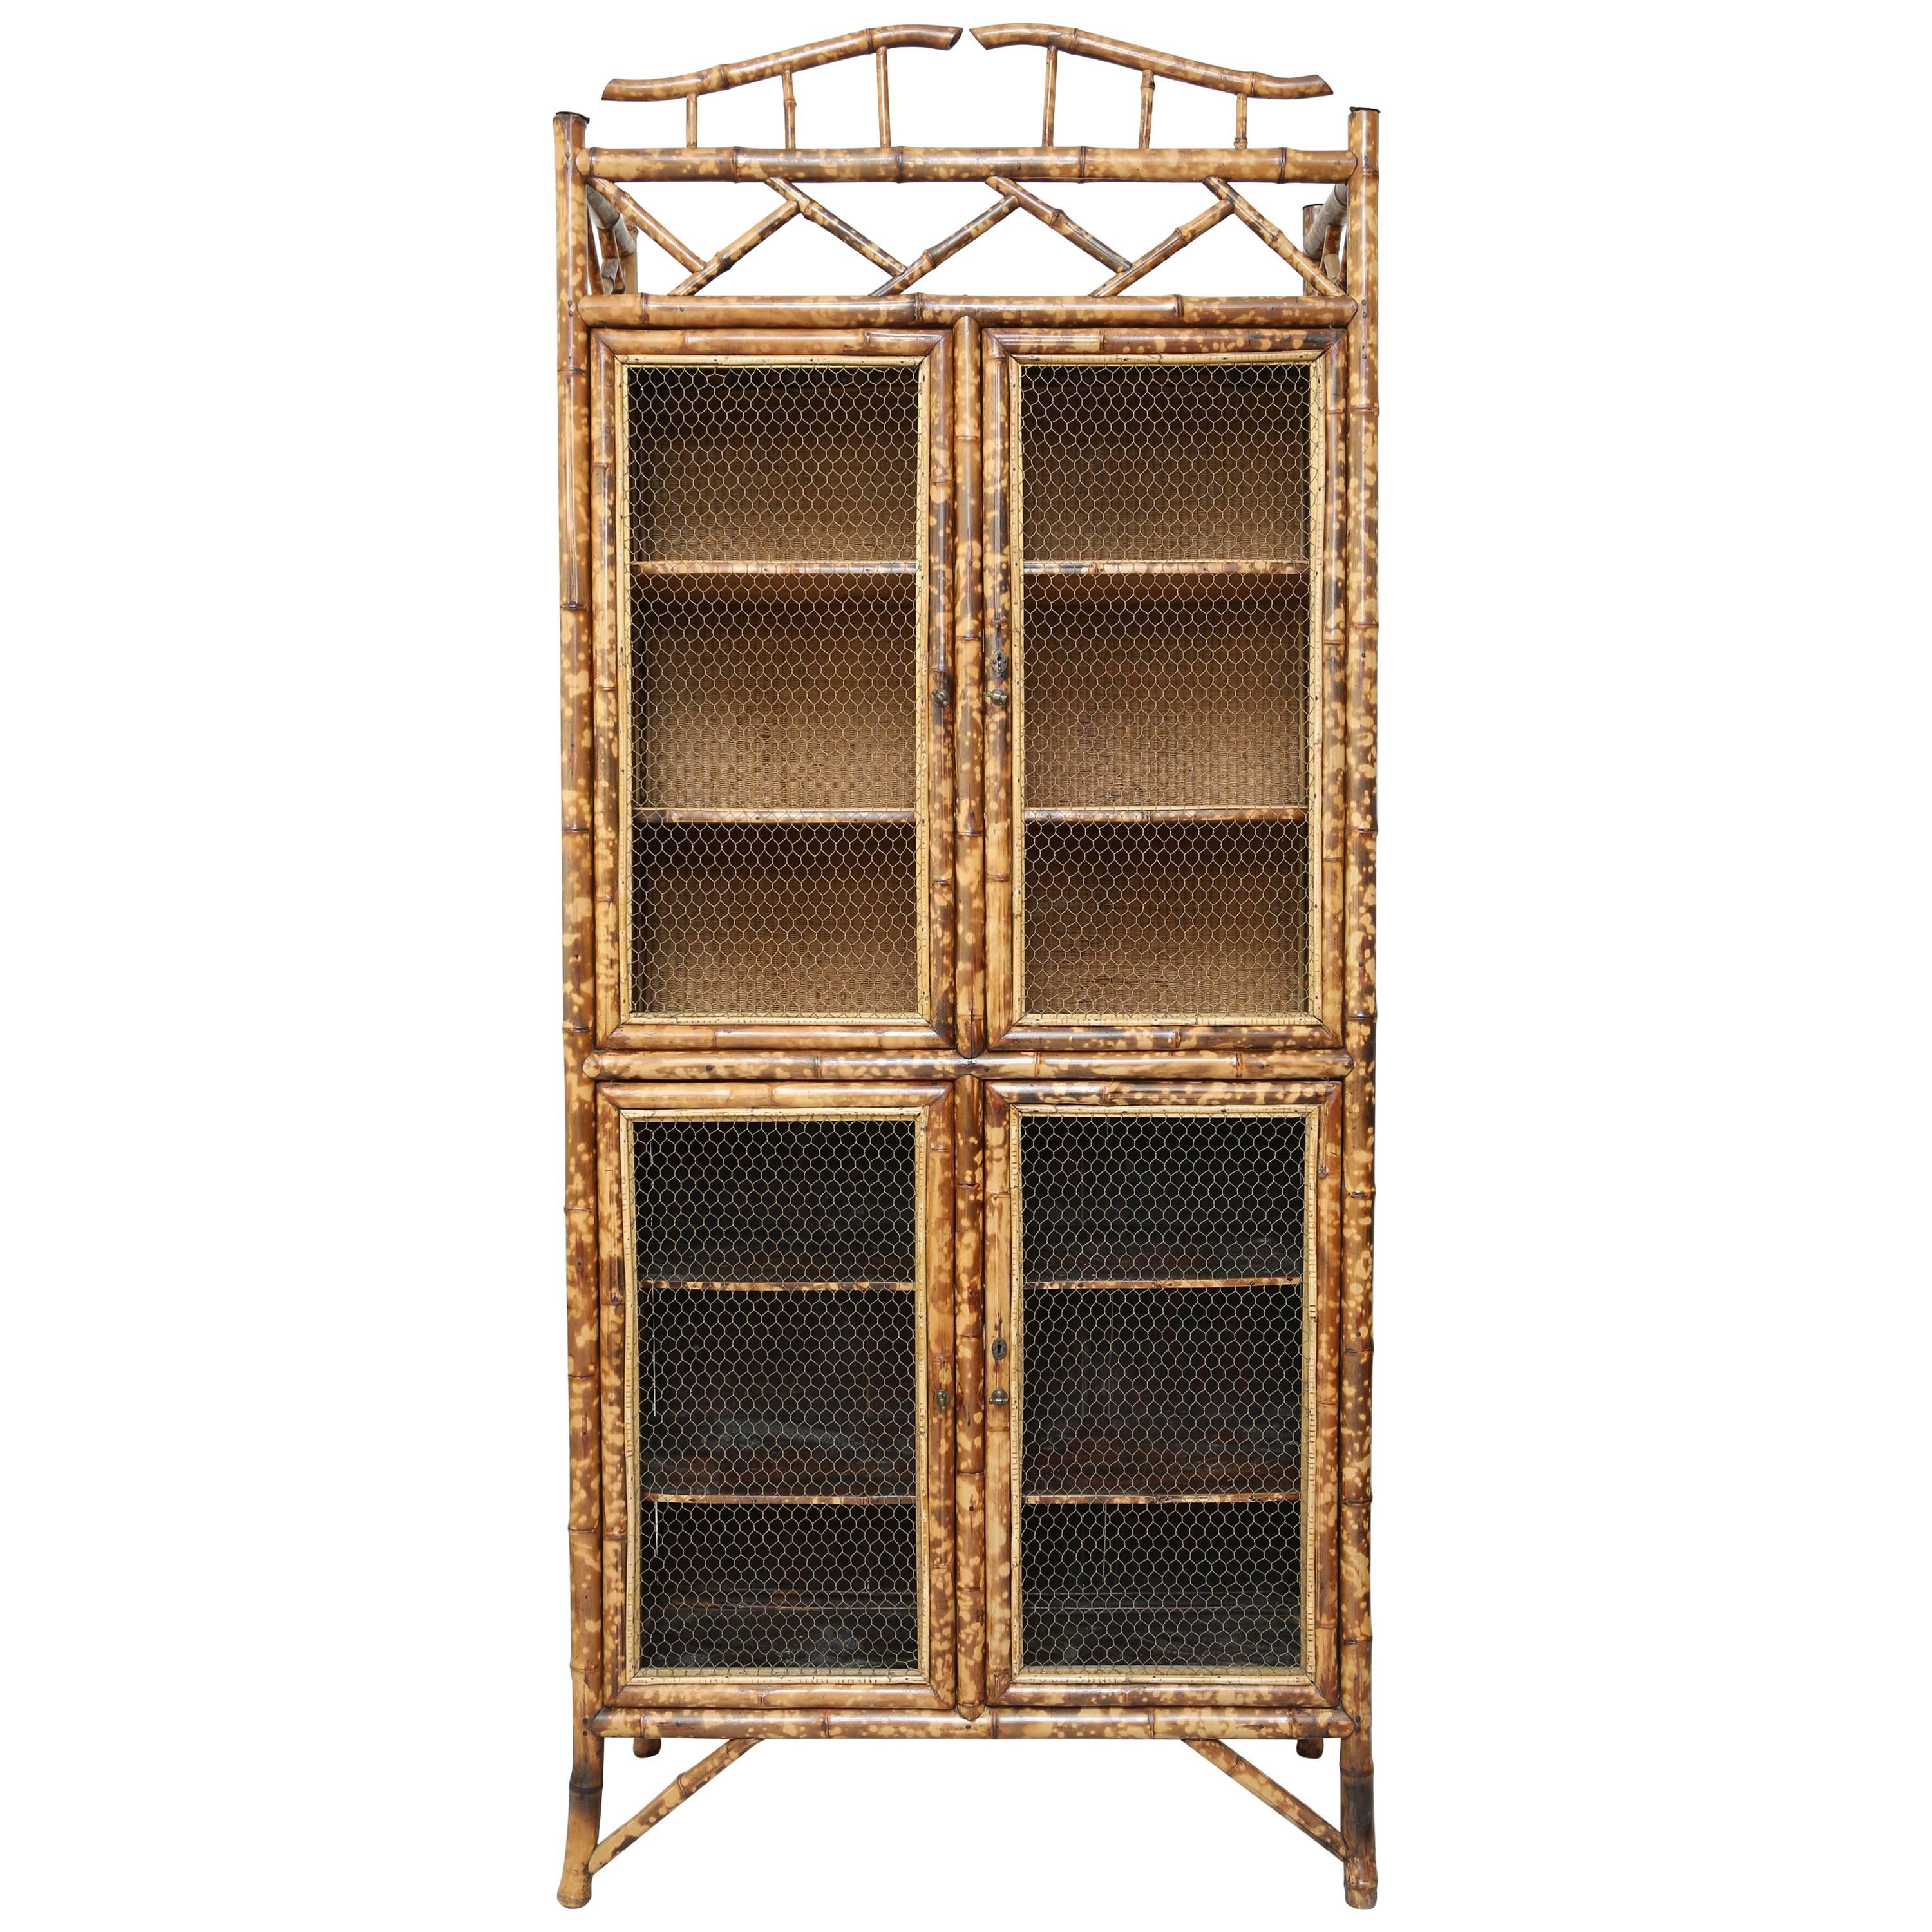 Antique Bamboo Cabinet with Chicken Wire Doors